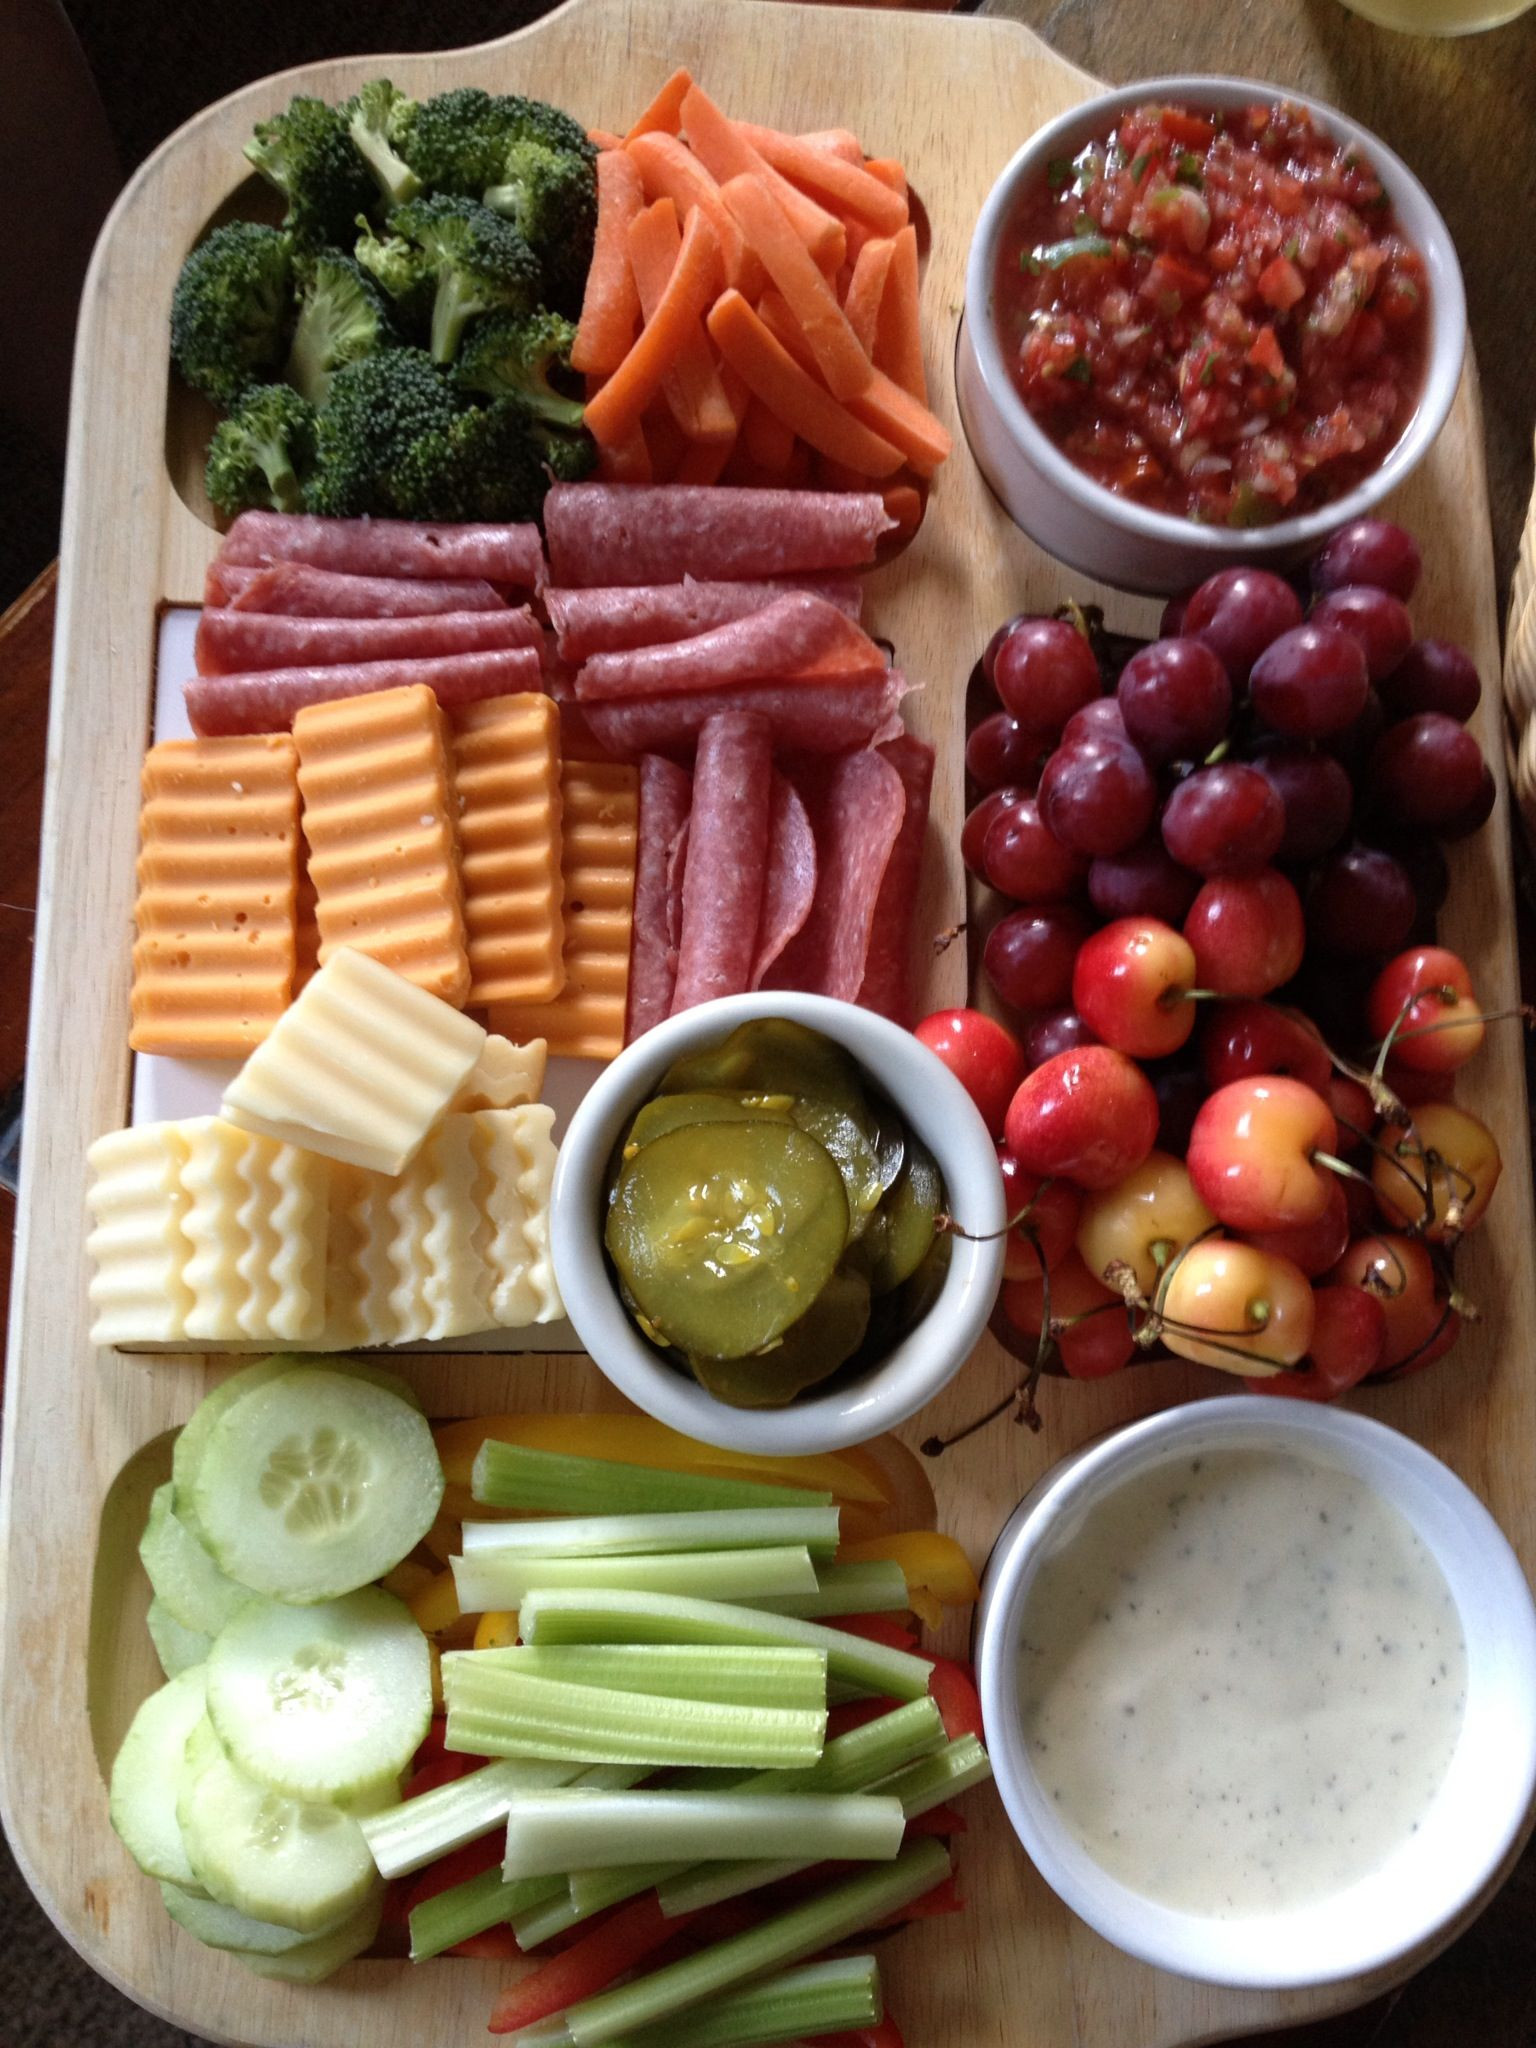 Healthy Movie Night Snacks
 At home movie snacks with a glass of wine